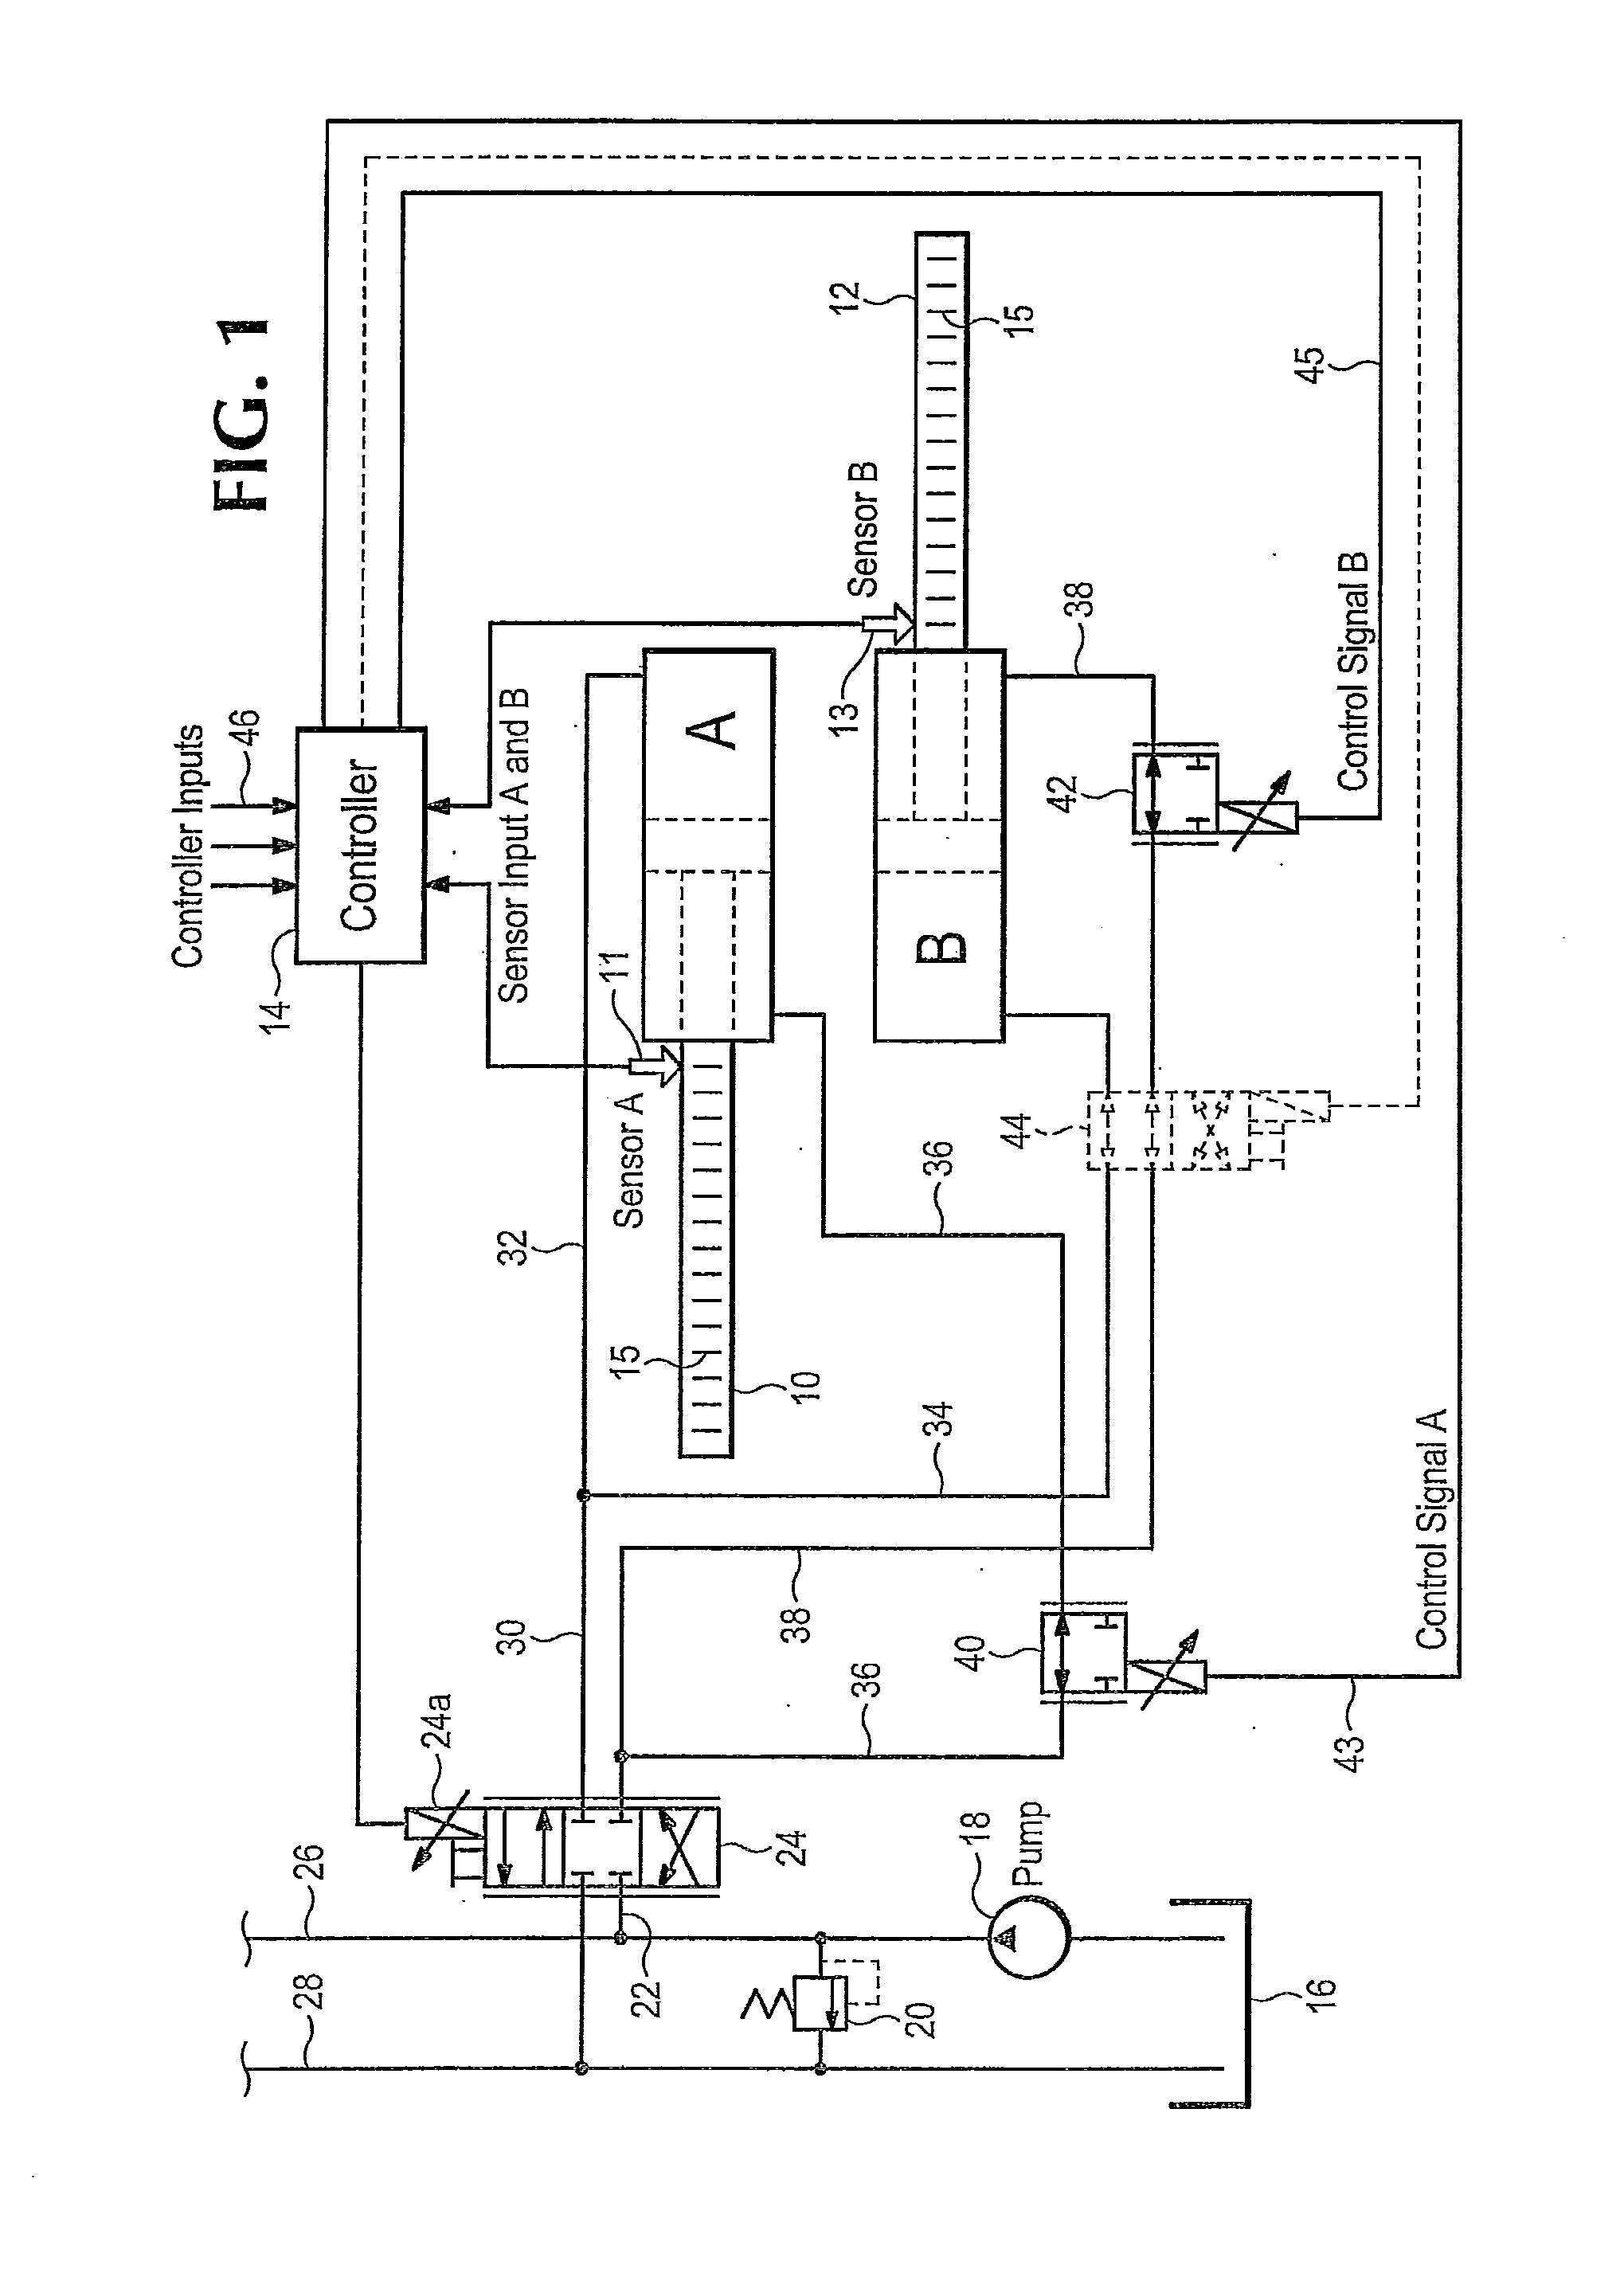 Fluid power control system for mobile load handling equipment